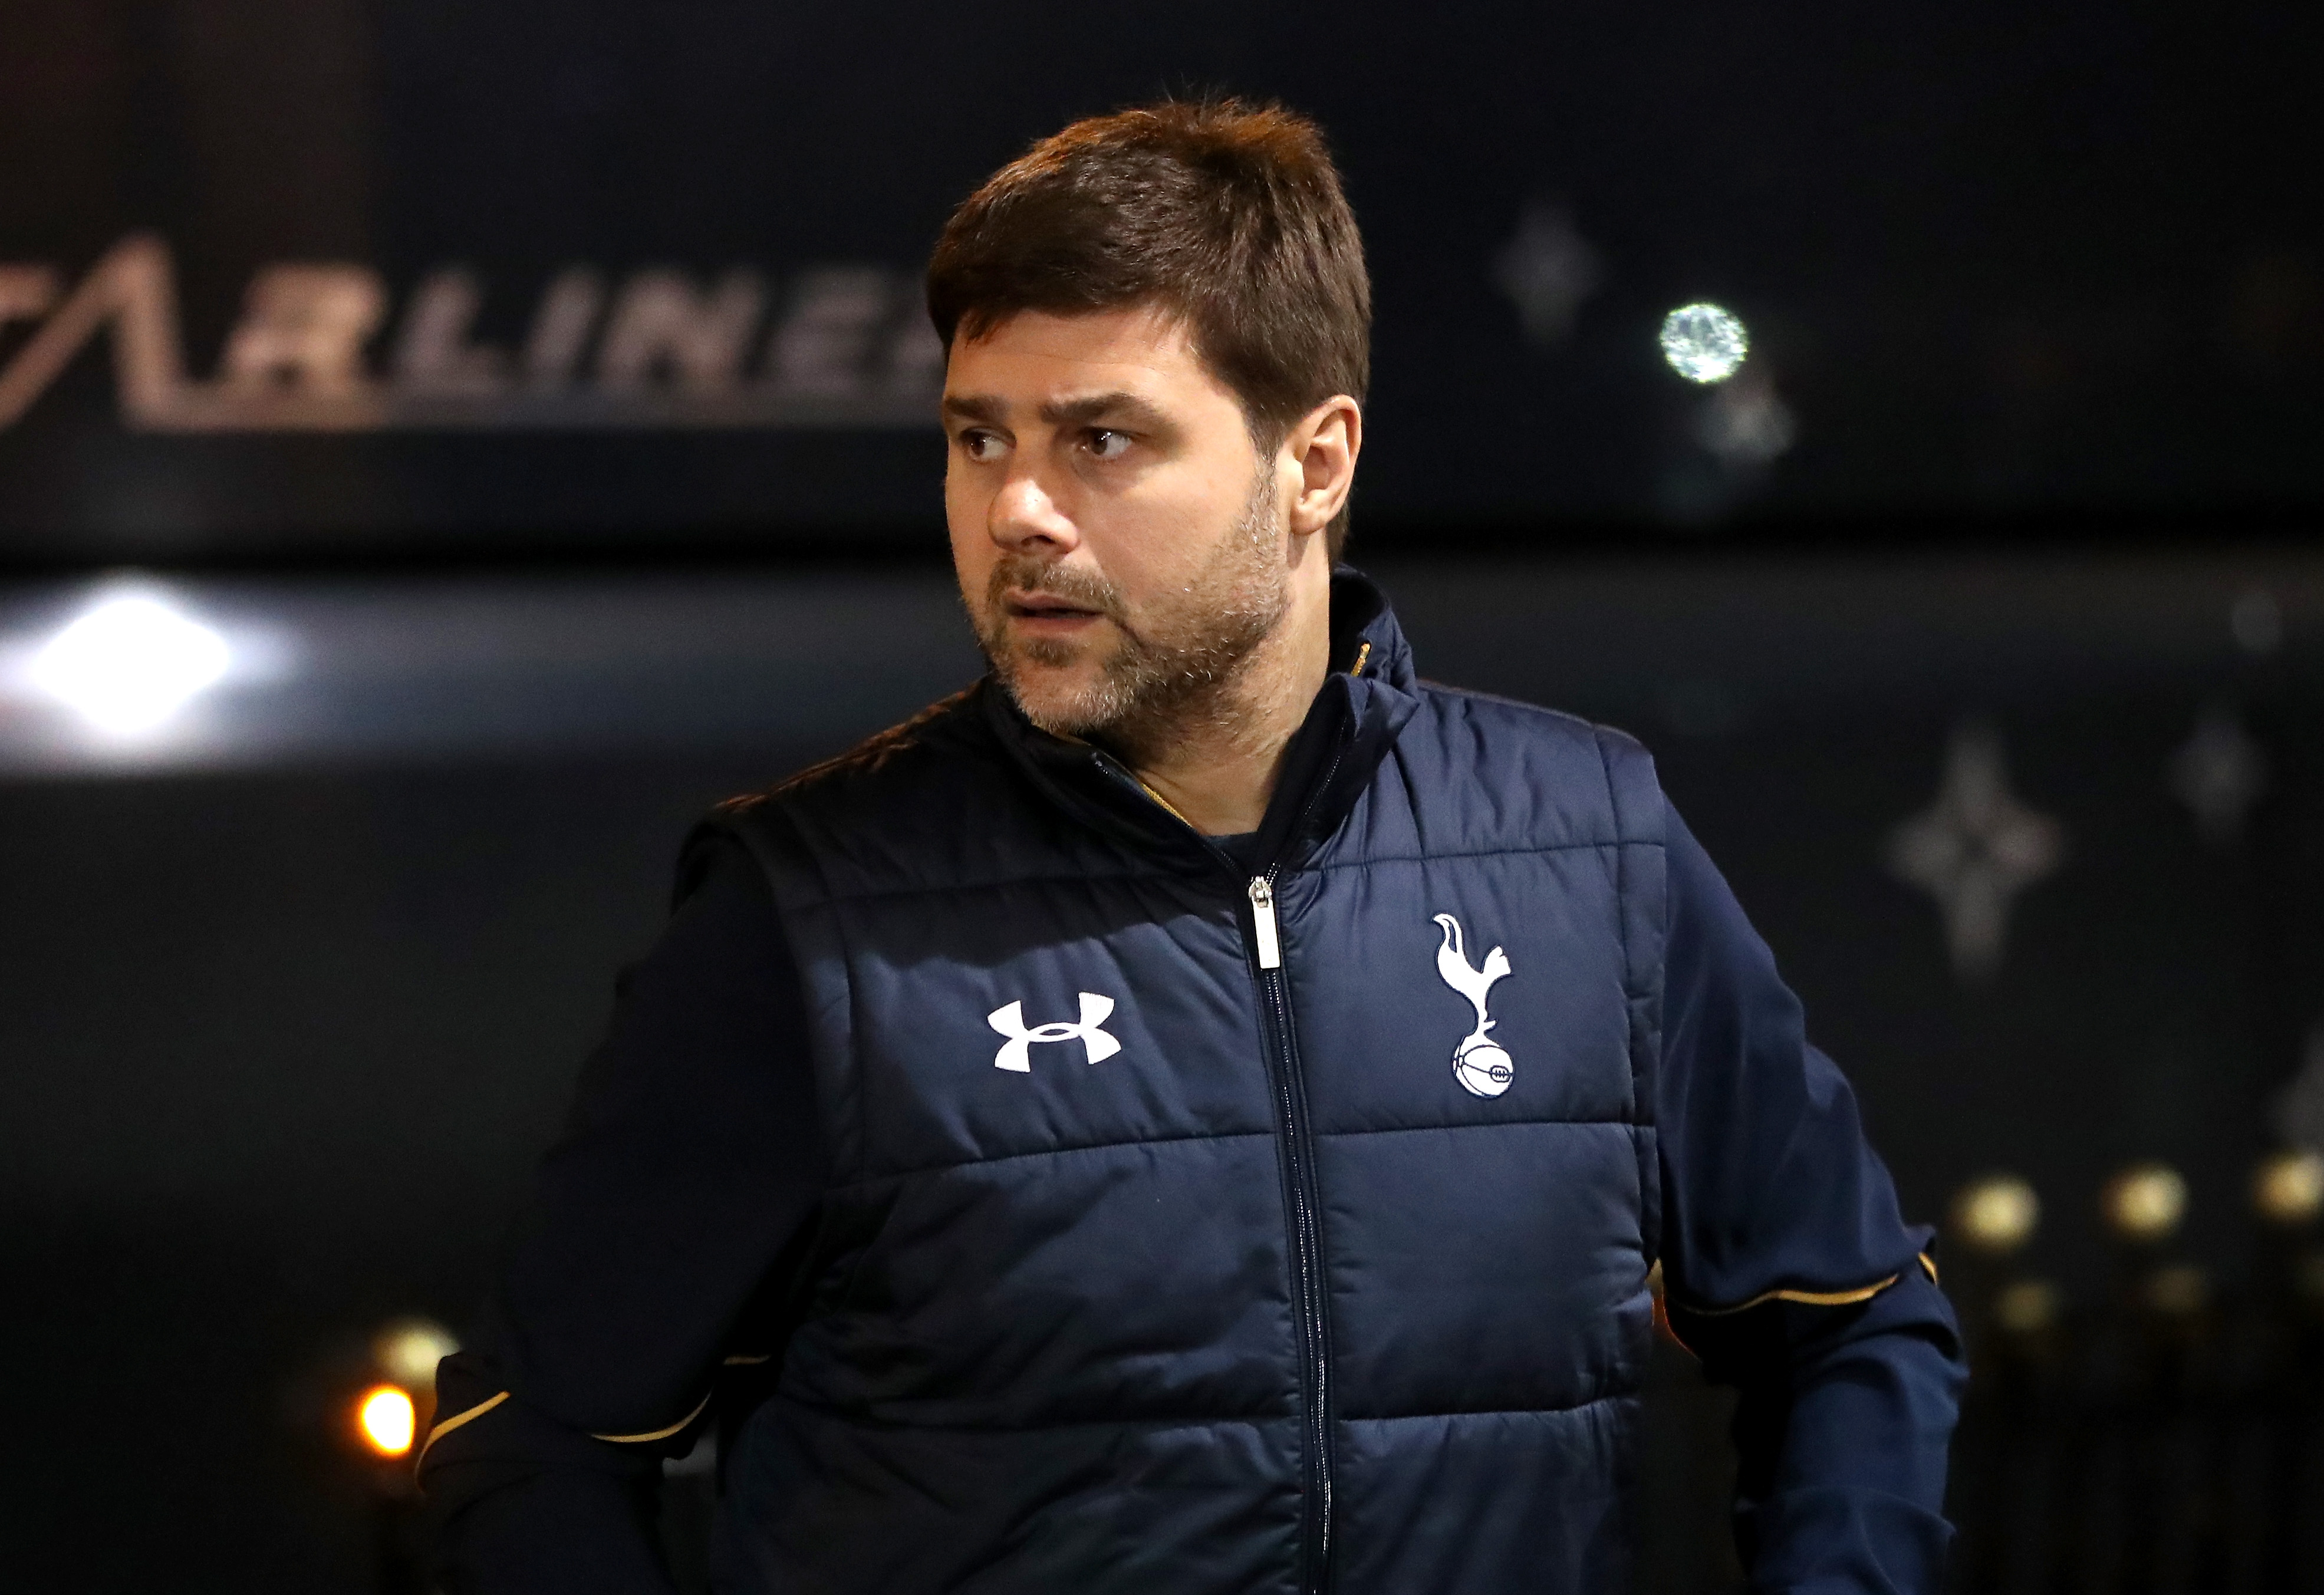 SUNDERLAND, ENGLAND - JANUARY 31:  Mauricio Pochettino, Manager of Tottenham Hotspur arrives at the stadium prior to the Premier League match between Sunderland and Tottenham Hotspur at Stadium of Light on January 31, 2017 in Sunderland, England.  (Photo by Ian MacNicol/Getty Images)